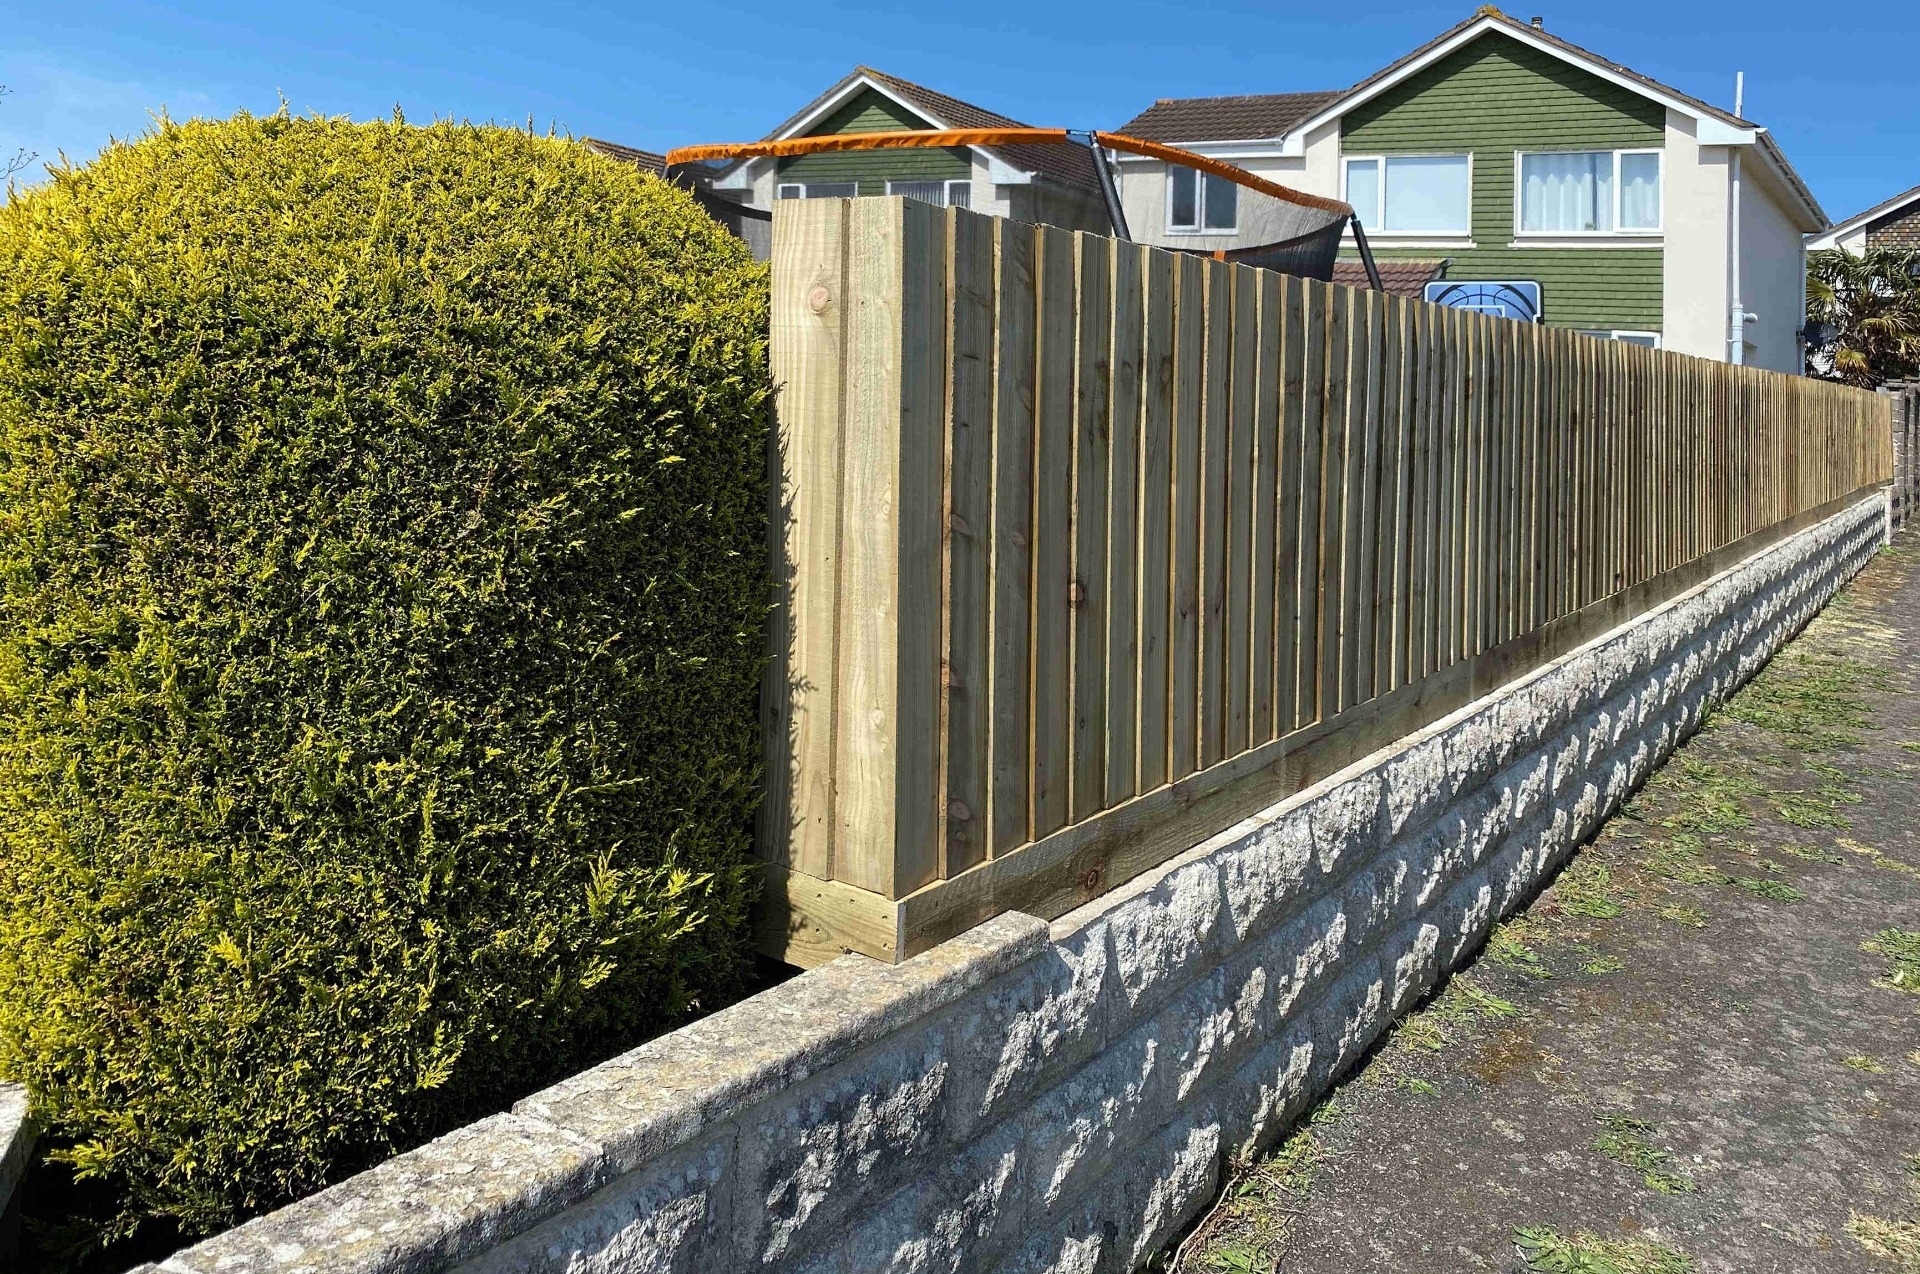 New replacement Fencing with Feather Edge Fence completed in North Devon